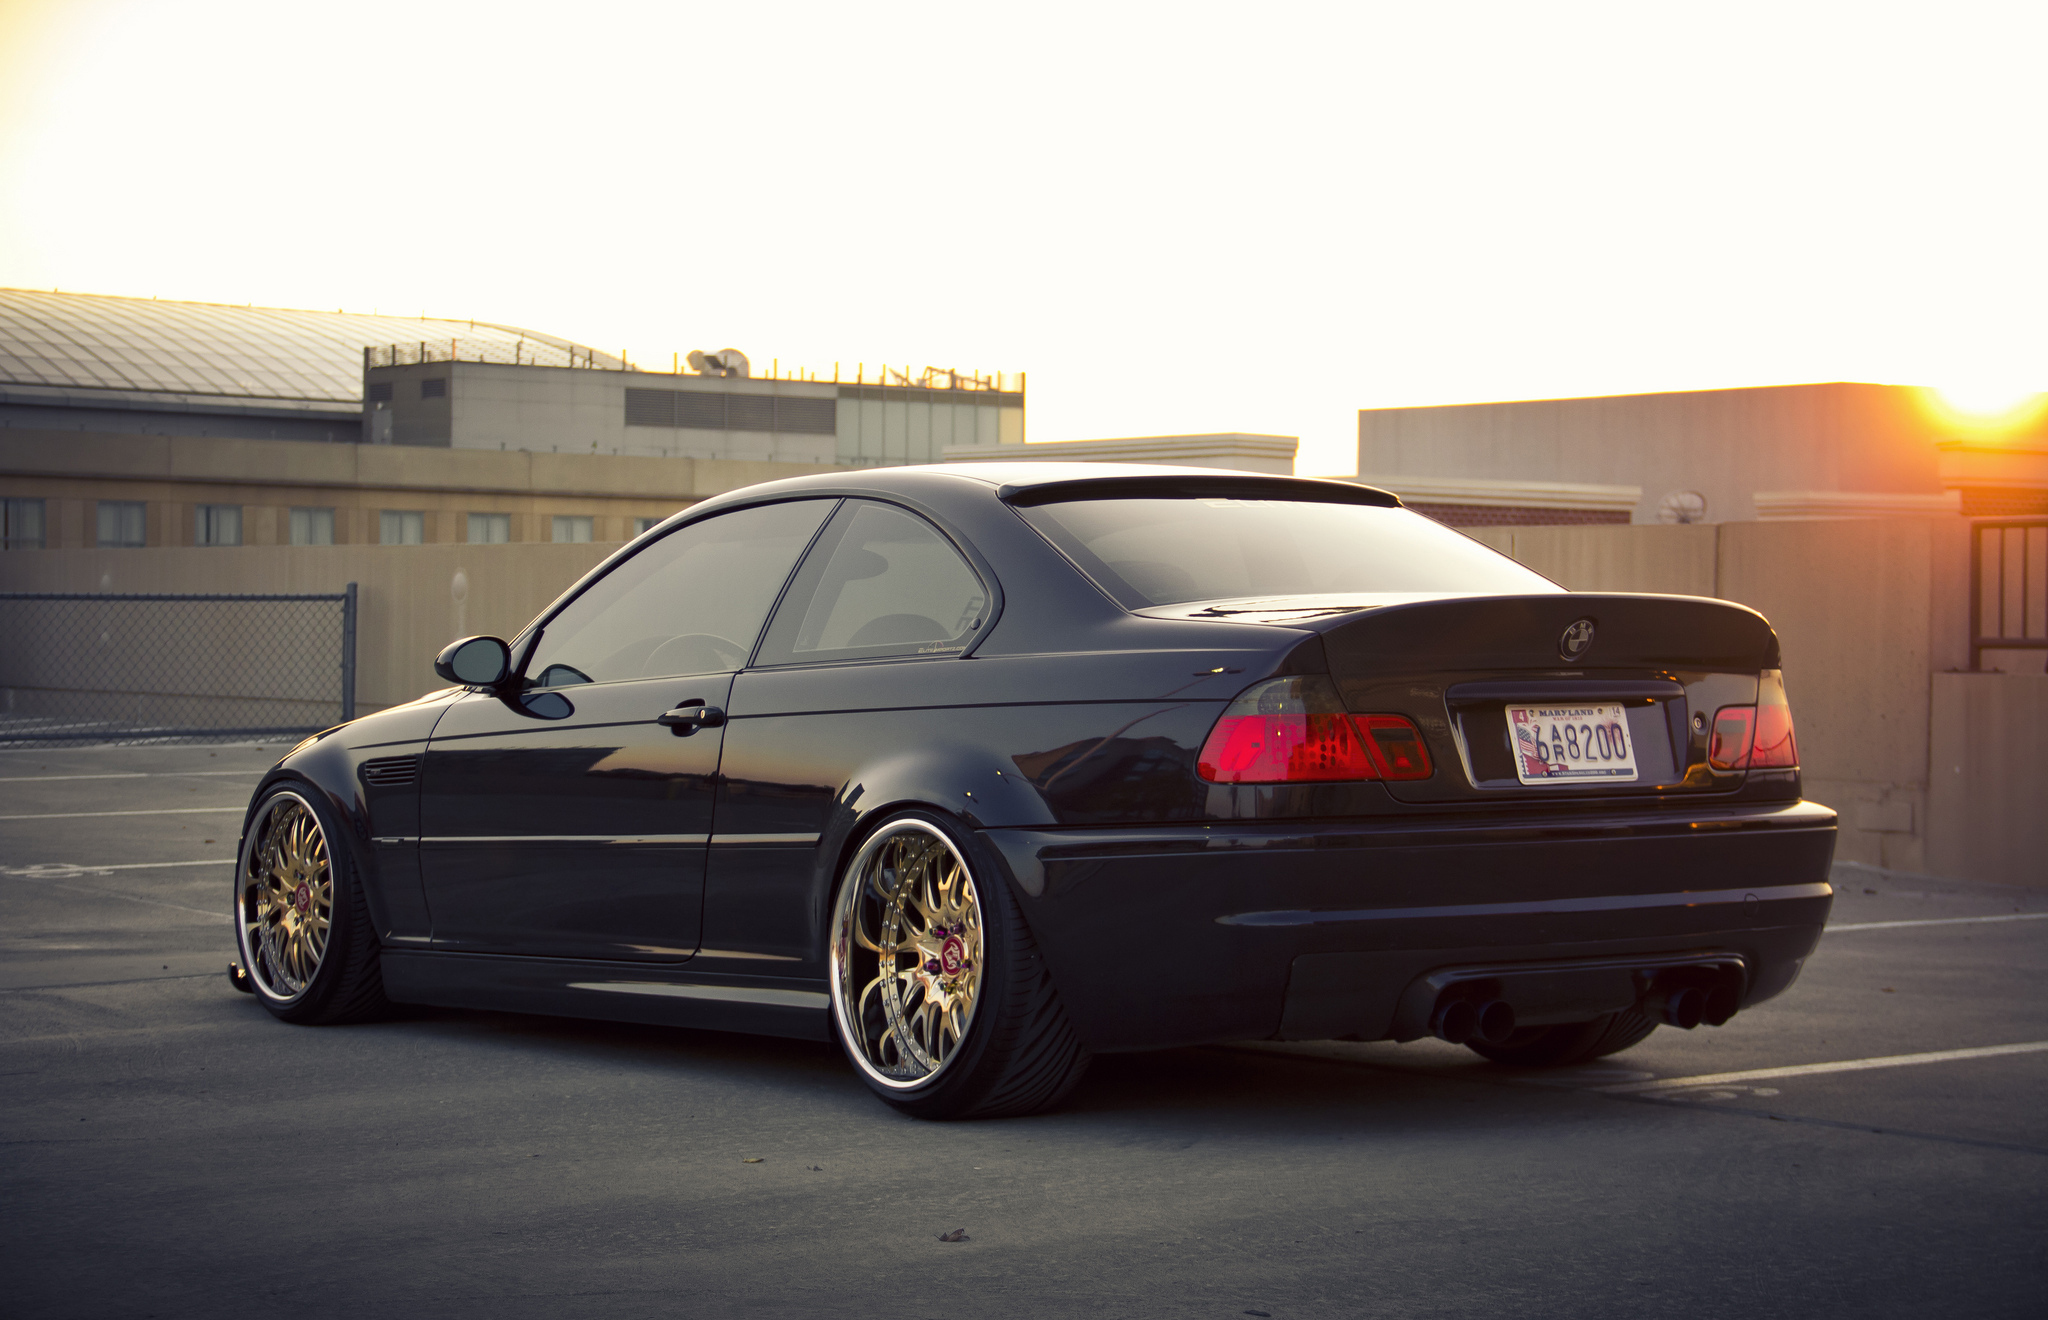 Wallpaper Of Bmw E46 M3 Stance Tuning Background & - Bmw E46 M3 Stance - HD Wallpaper 